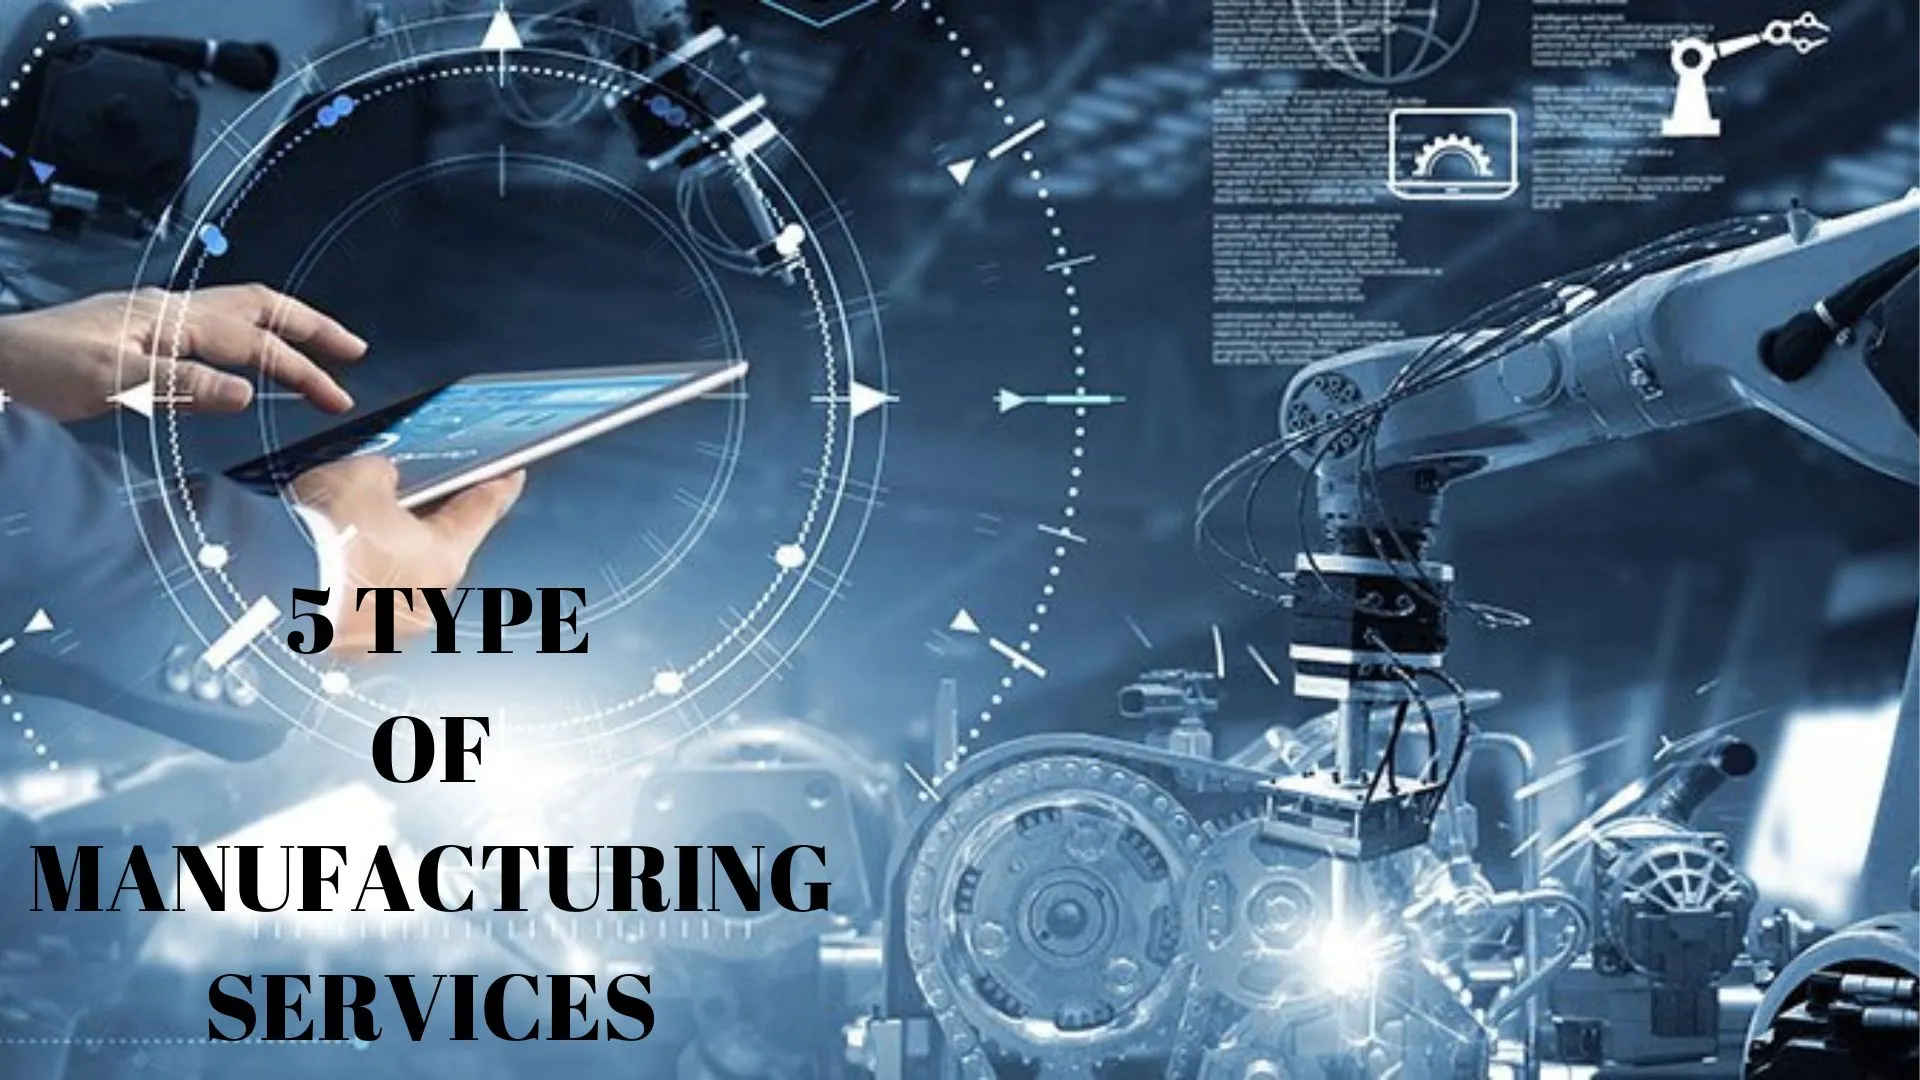 5 types of manufacturing services